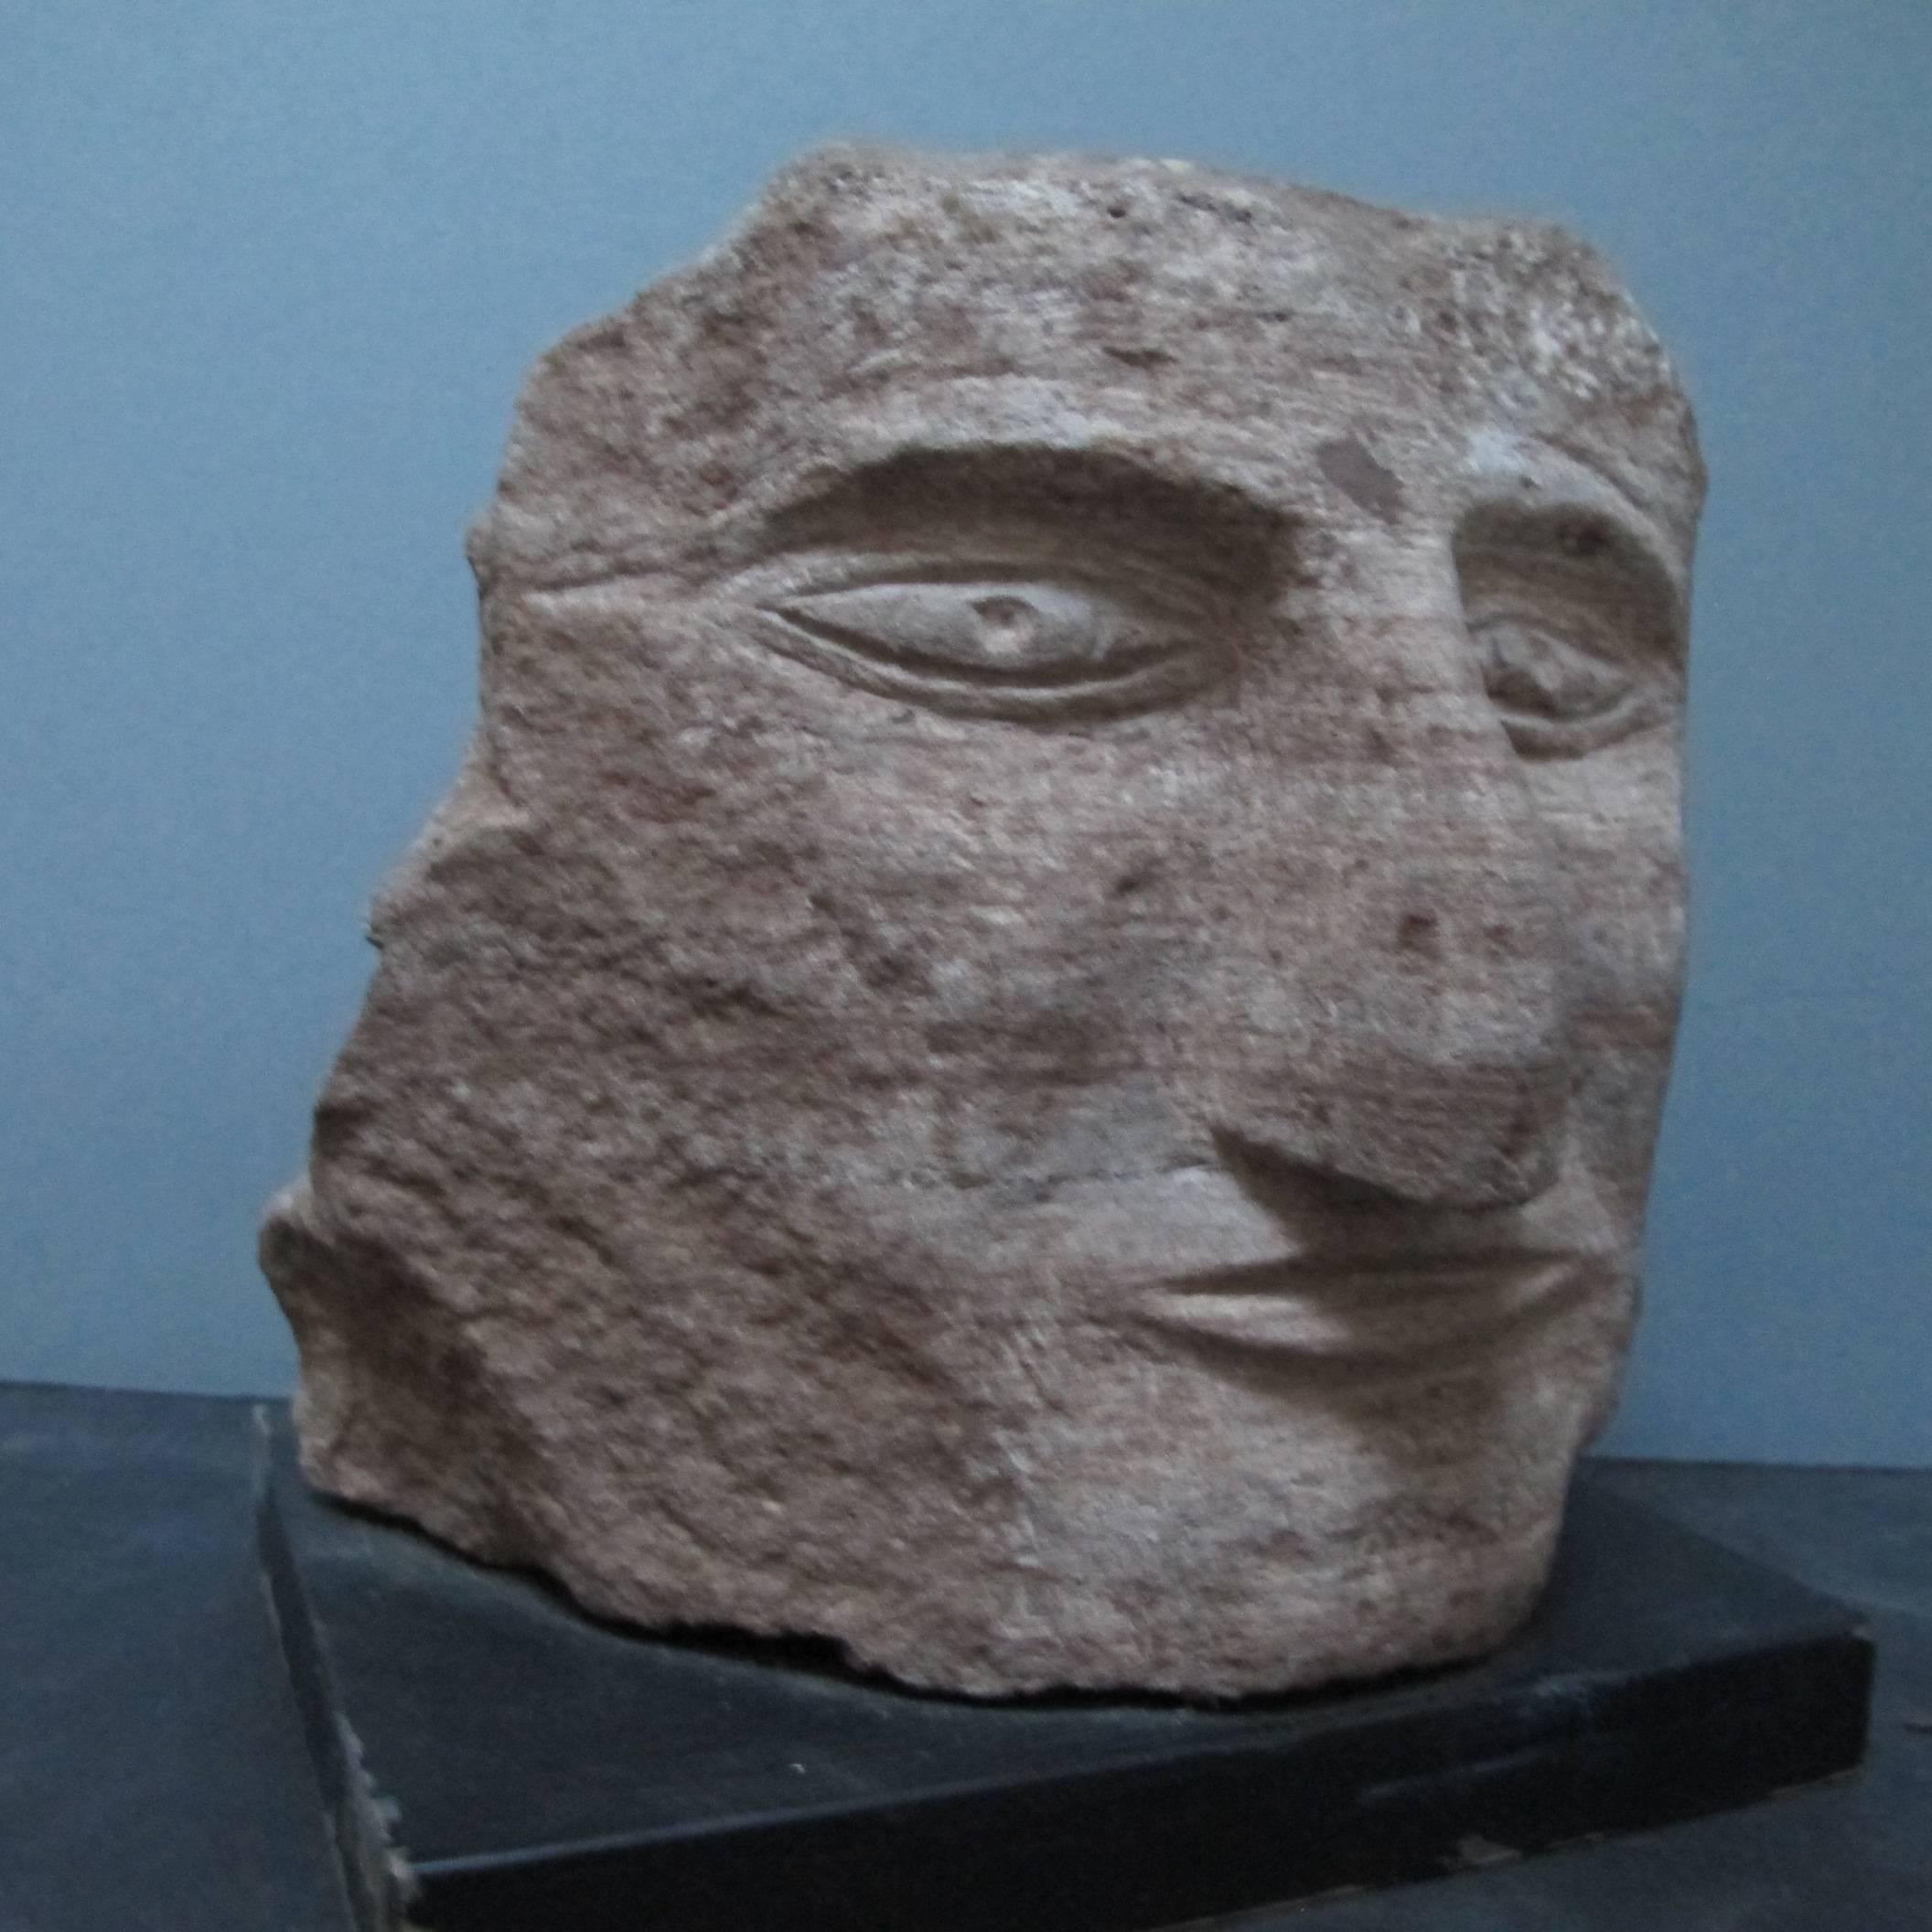 Ted Ludwiczak was known for carving numerous stone sculptures of stone heads. His home became an environment that has been written about in different publications from Raw Vision to Folk Art Messenger to the New York Times.
The sculpture comes with